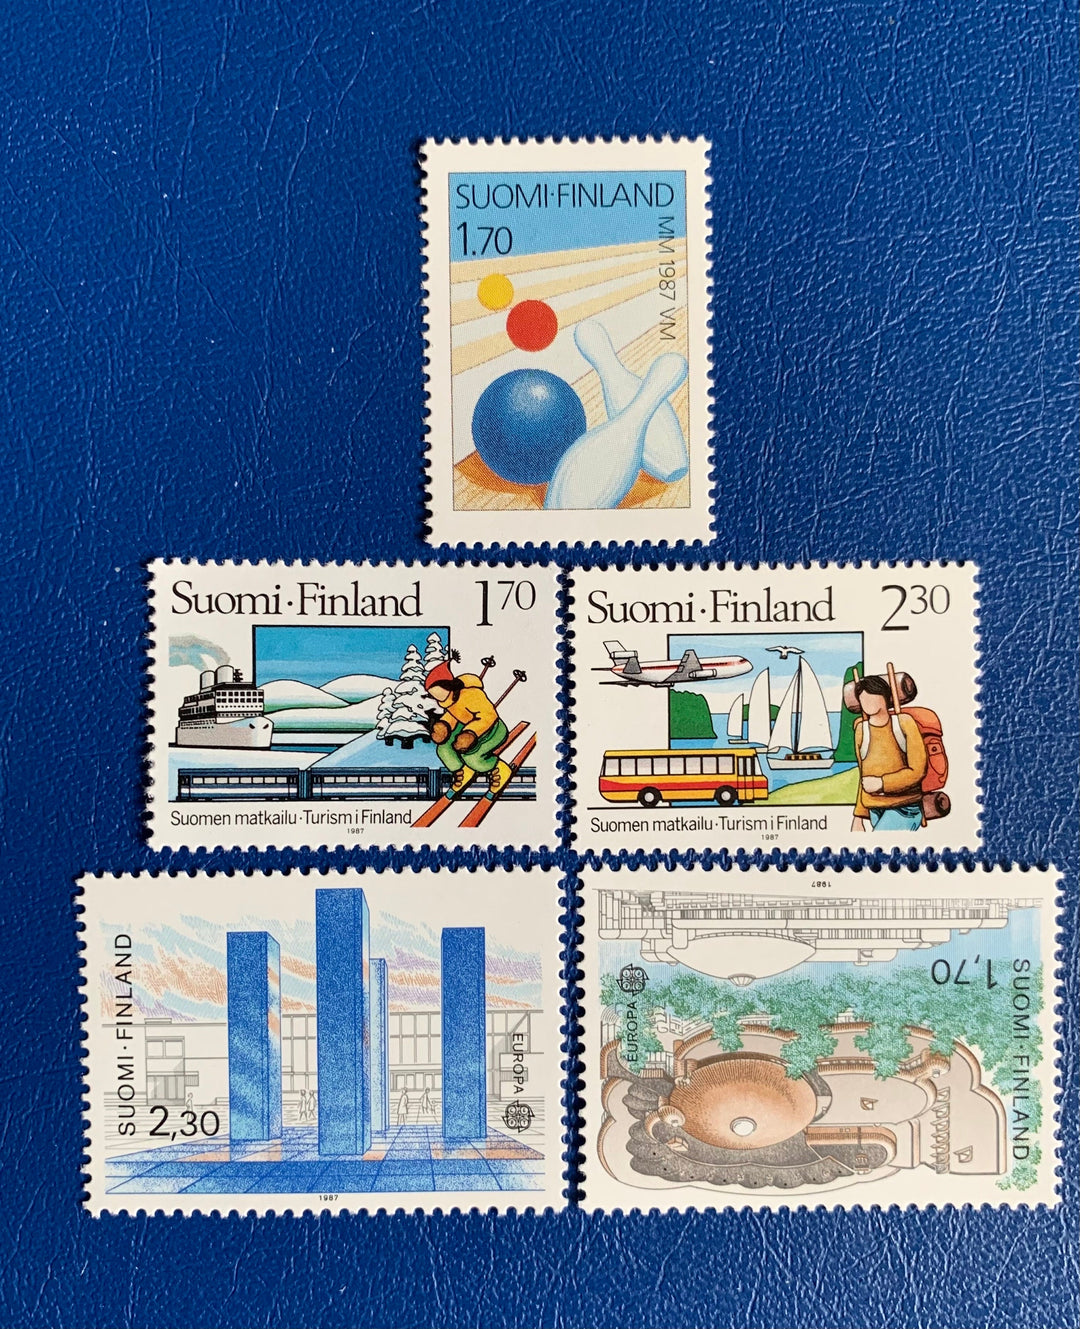 Finland -Original Vintage Postage Stamps- 1987 Modern architecture, tourism, bowling - for the collector, artist or crafter